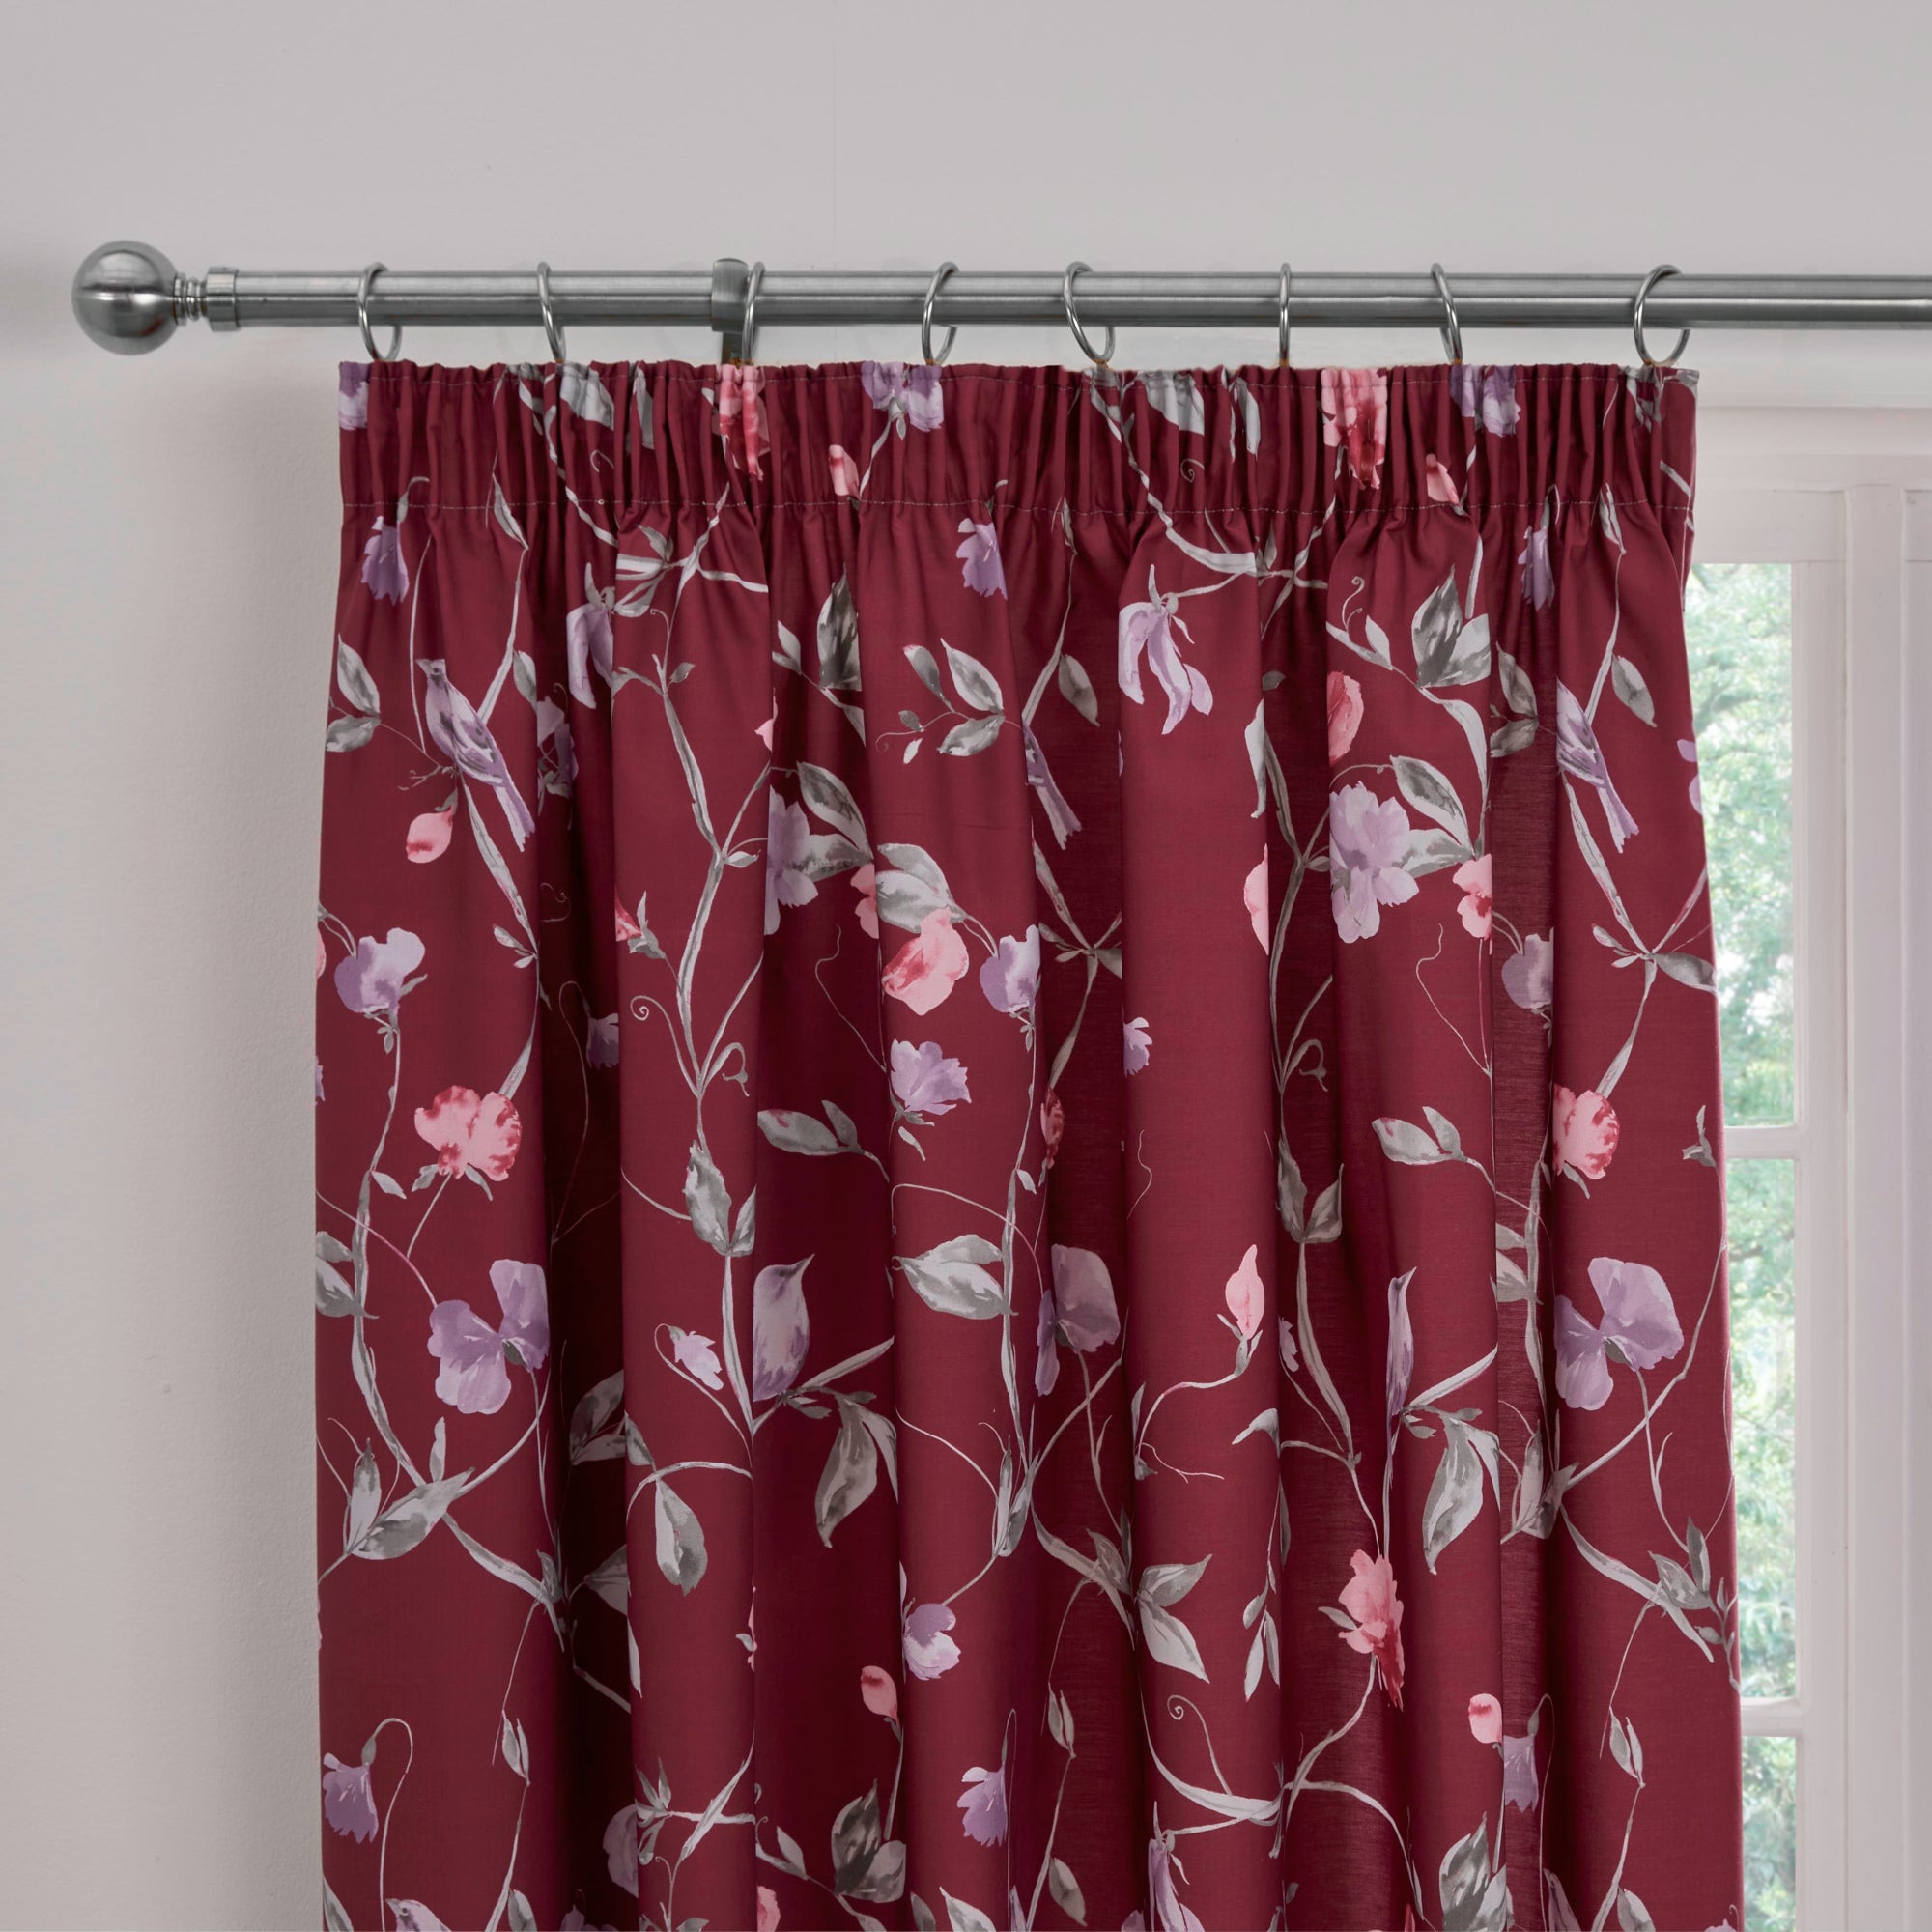 Pair of Pencil Pleat Curtains With Tie-Backs Sweet Pea by Dreams And Drapes Design in Plum